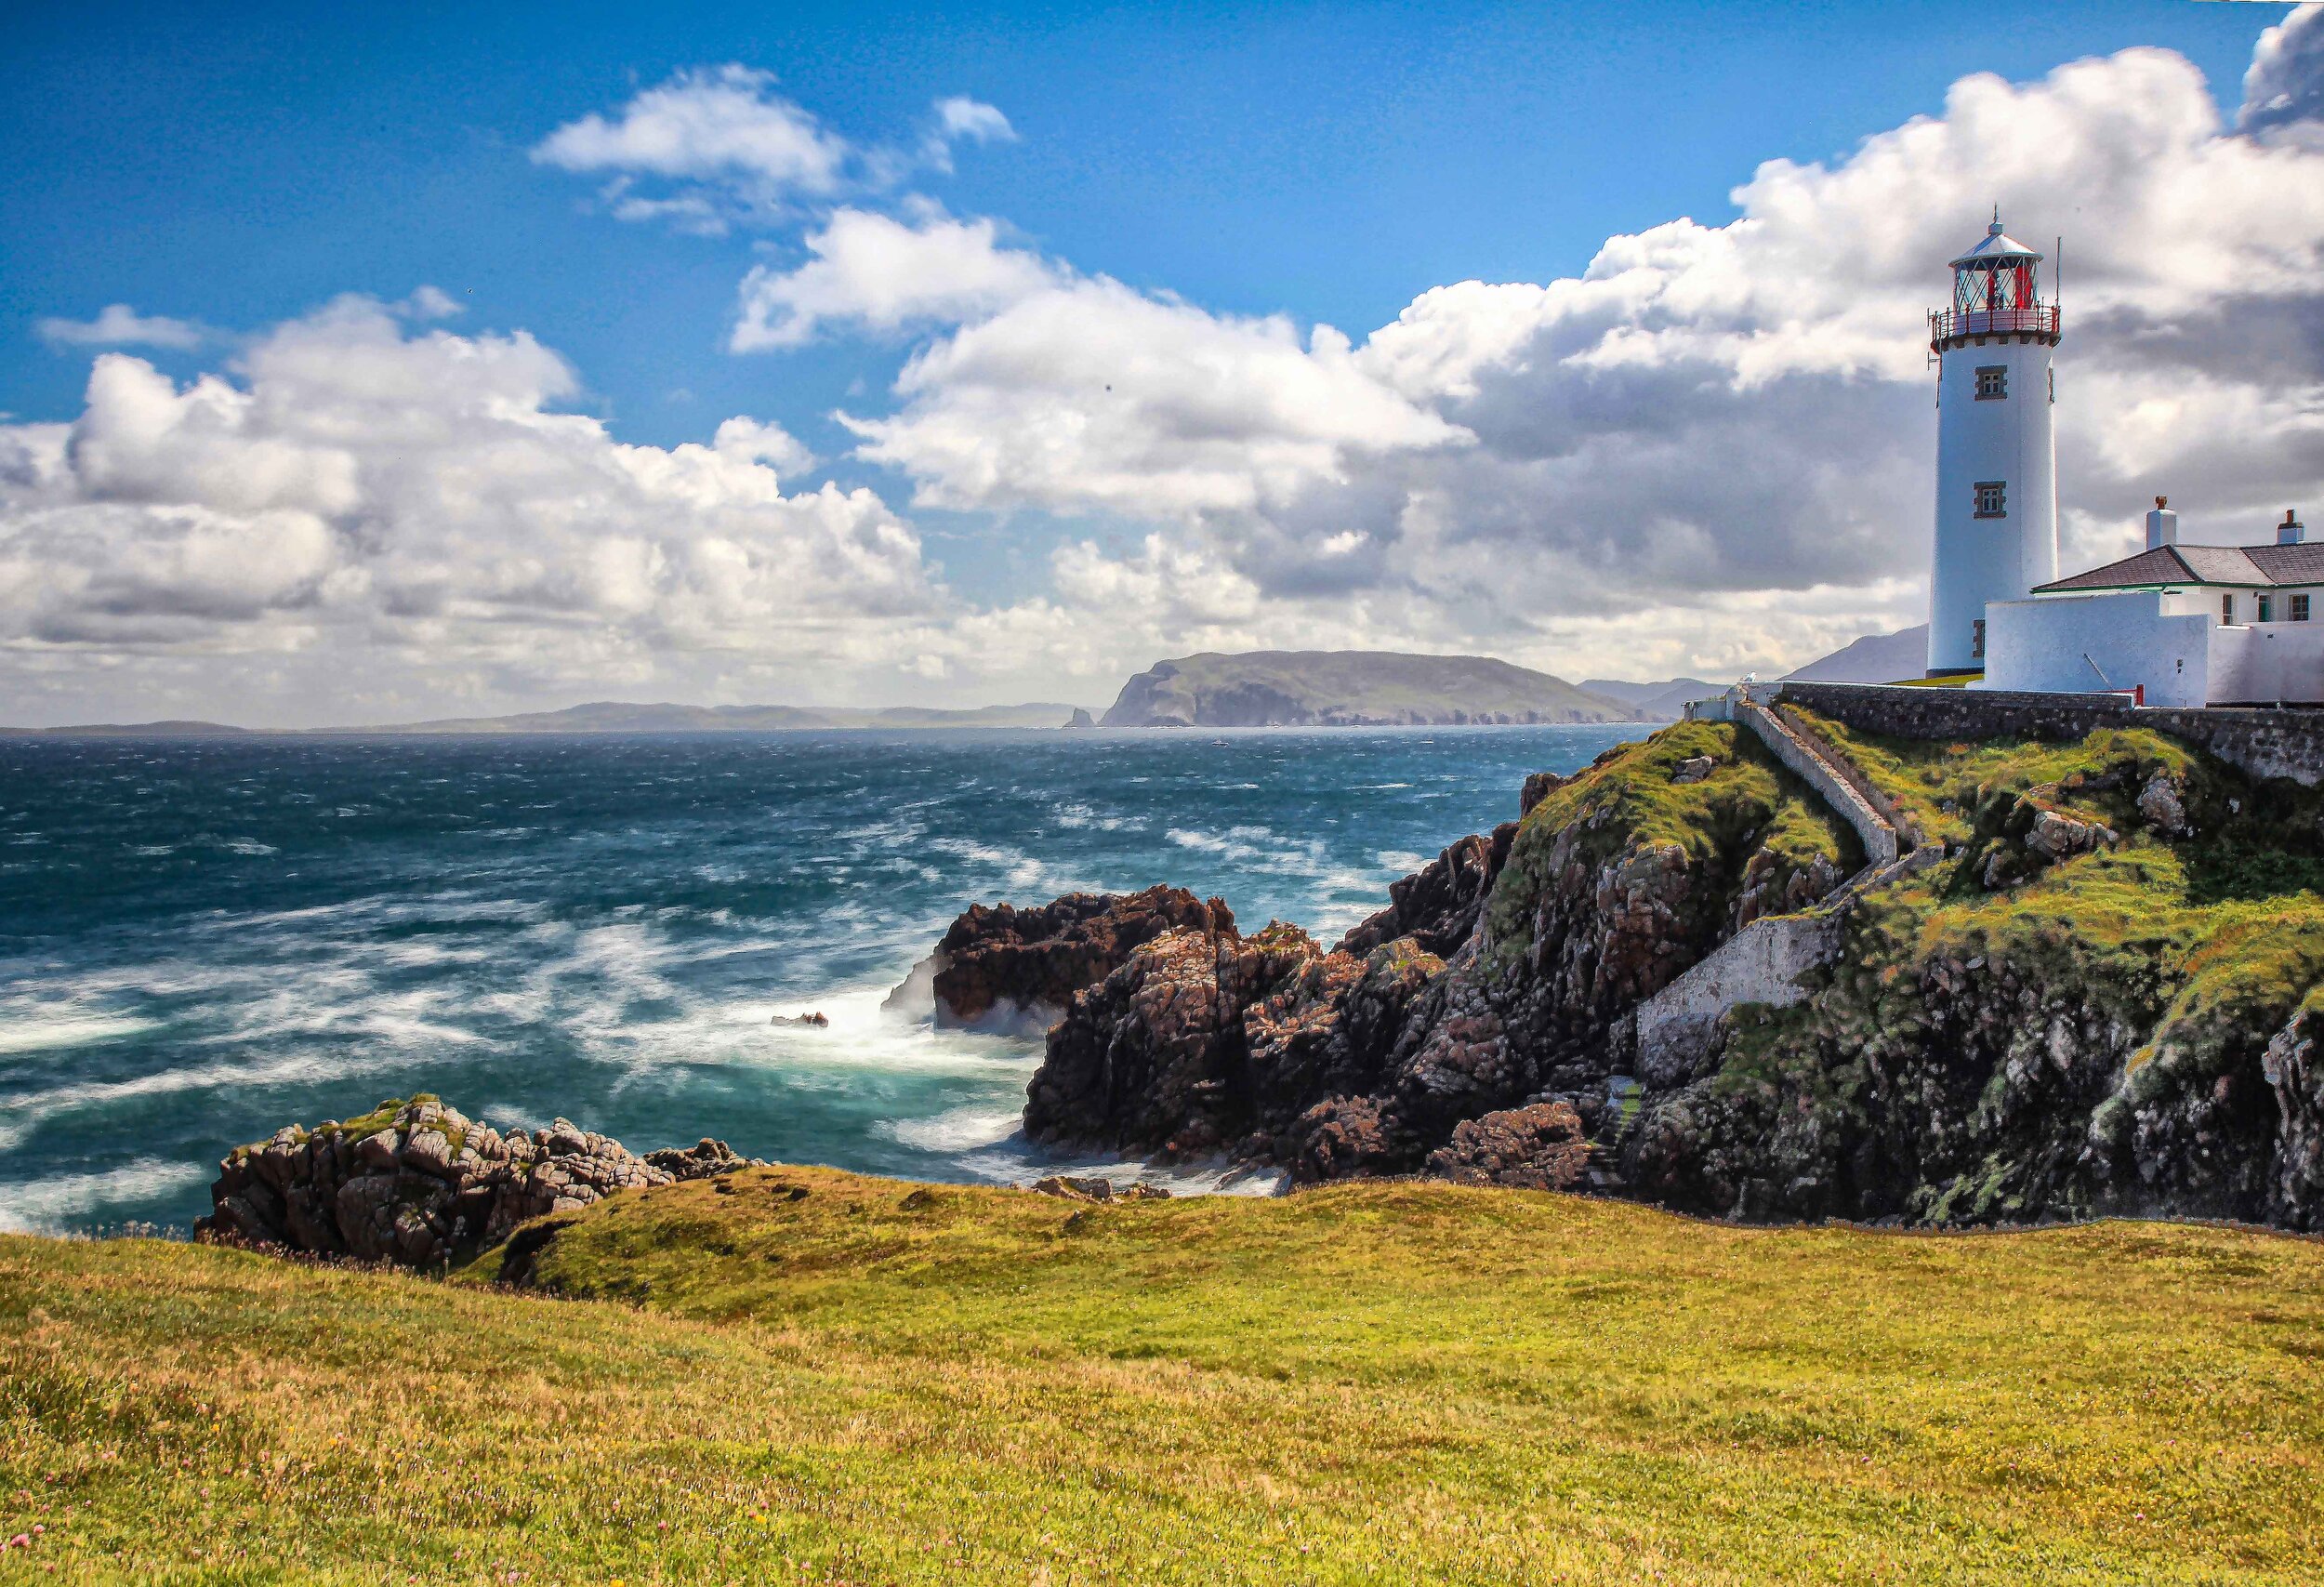  Fanah Head Lighthouse, County Donegal, Ireland         